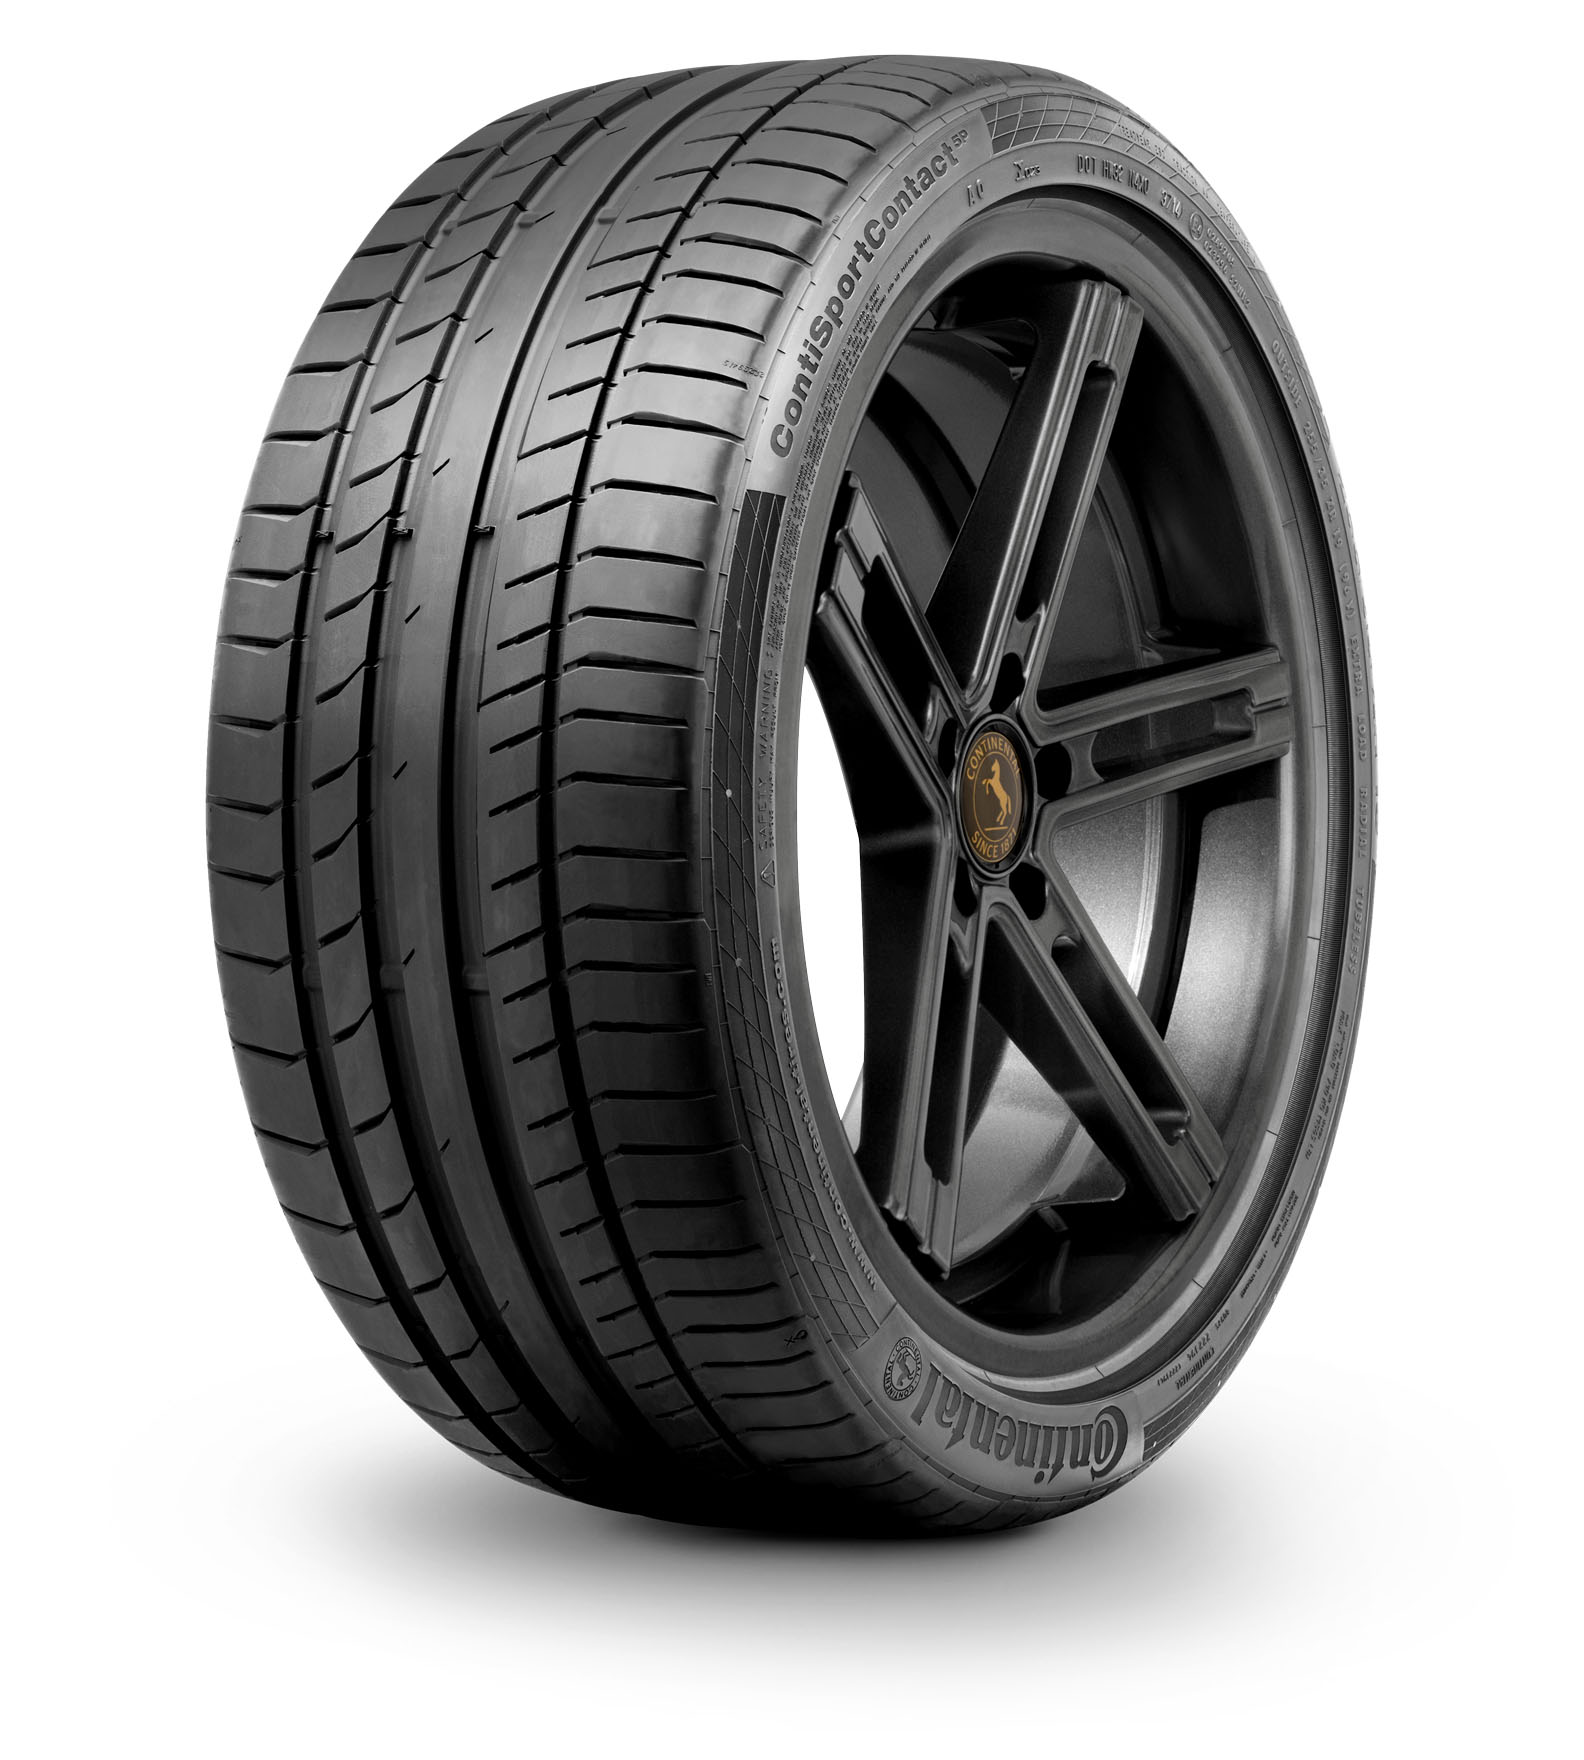 Continental 305/40R20 112Y ContiSportContact™ 5 P N0 DOT21